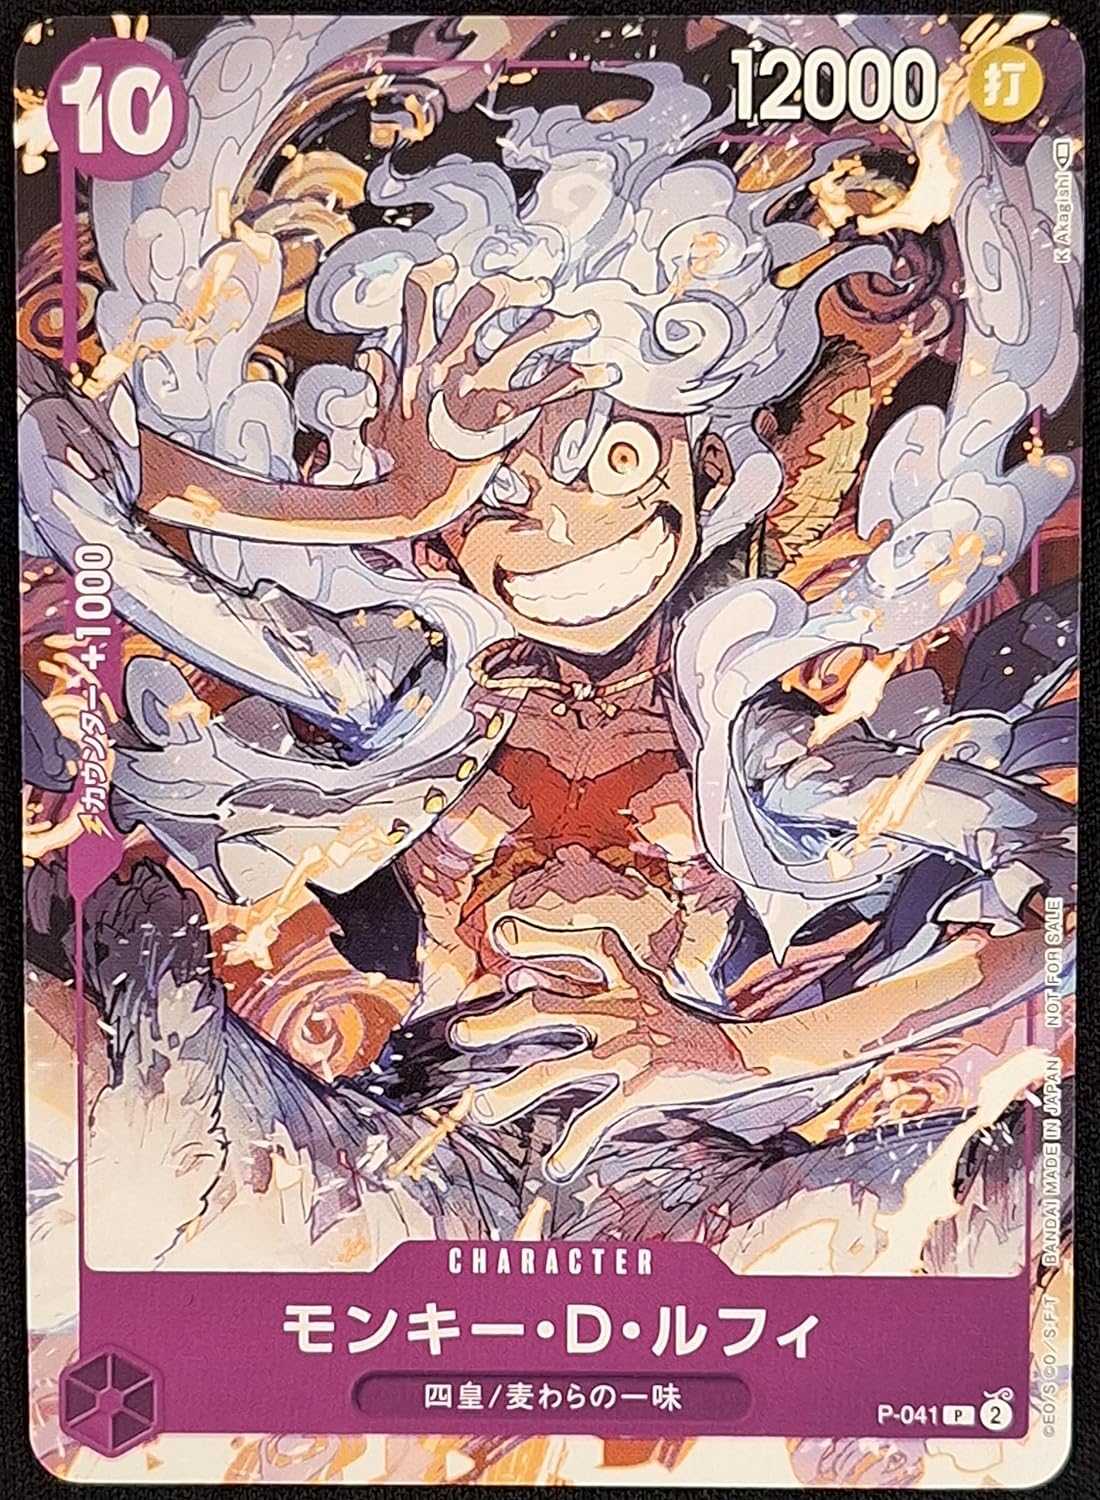 Carddass - One Piece - Promotional Card P-041 Monkey D. Luffy Nika